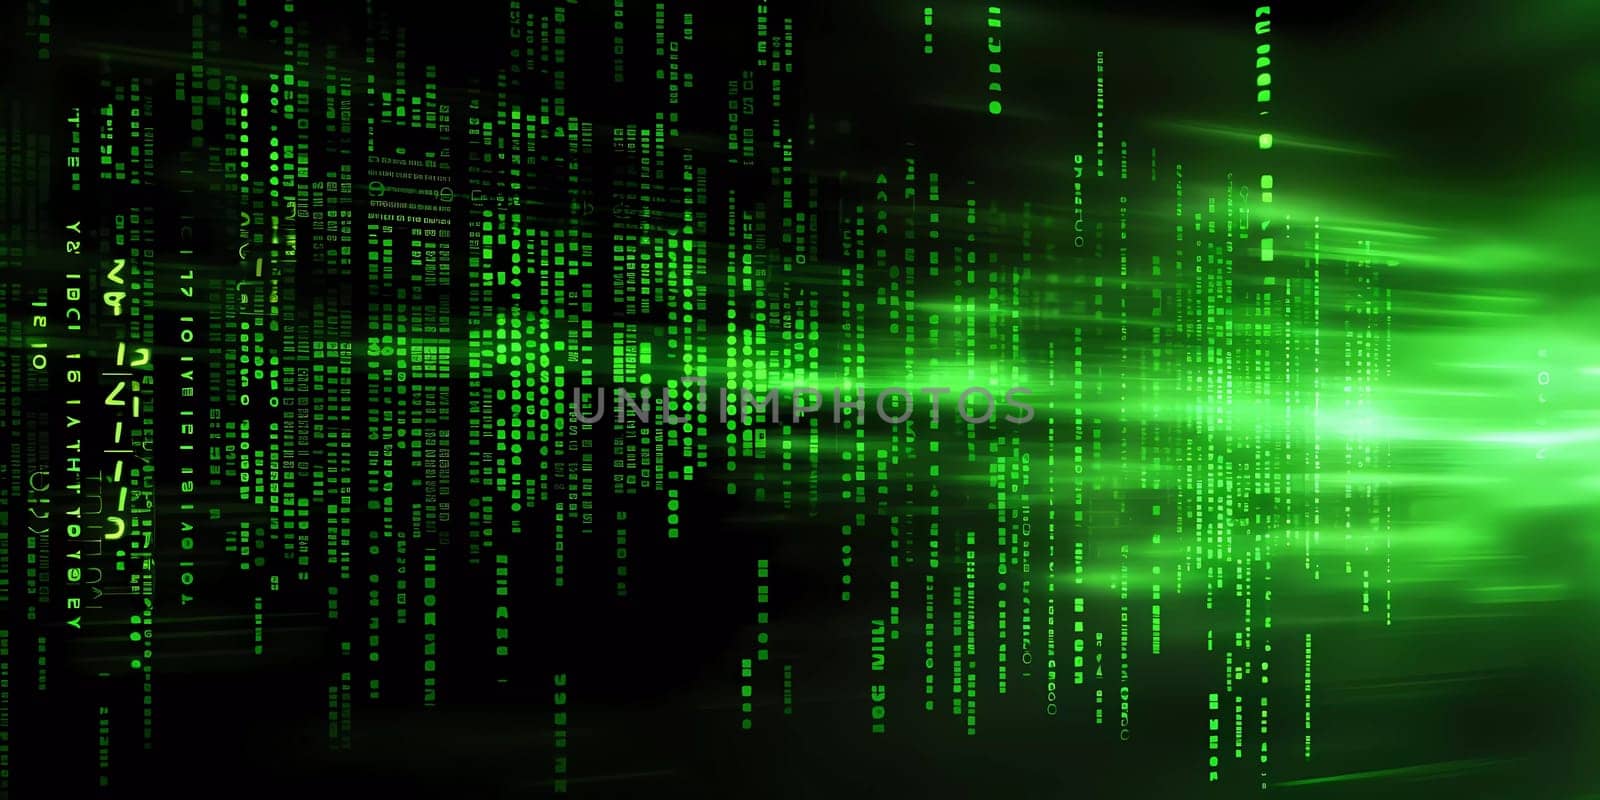 Computer background with green digits and symbols on a black background